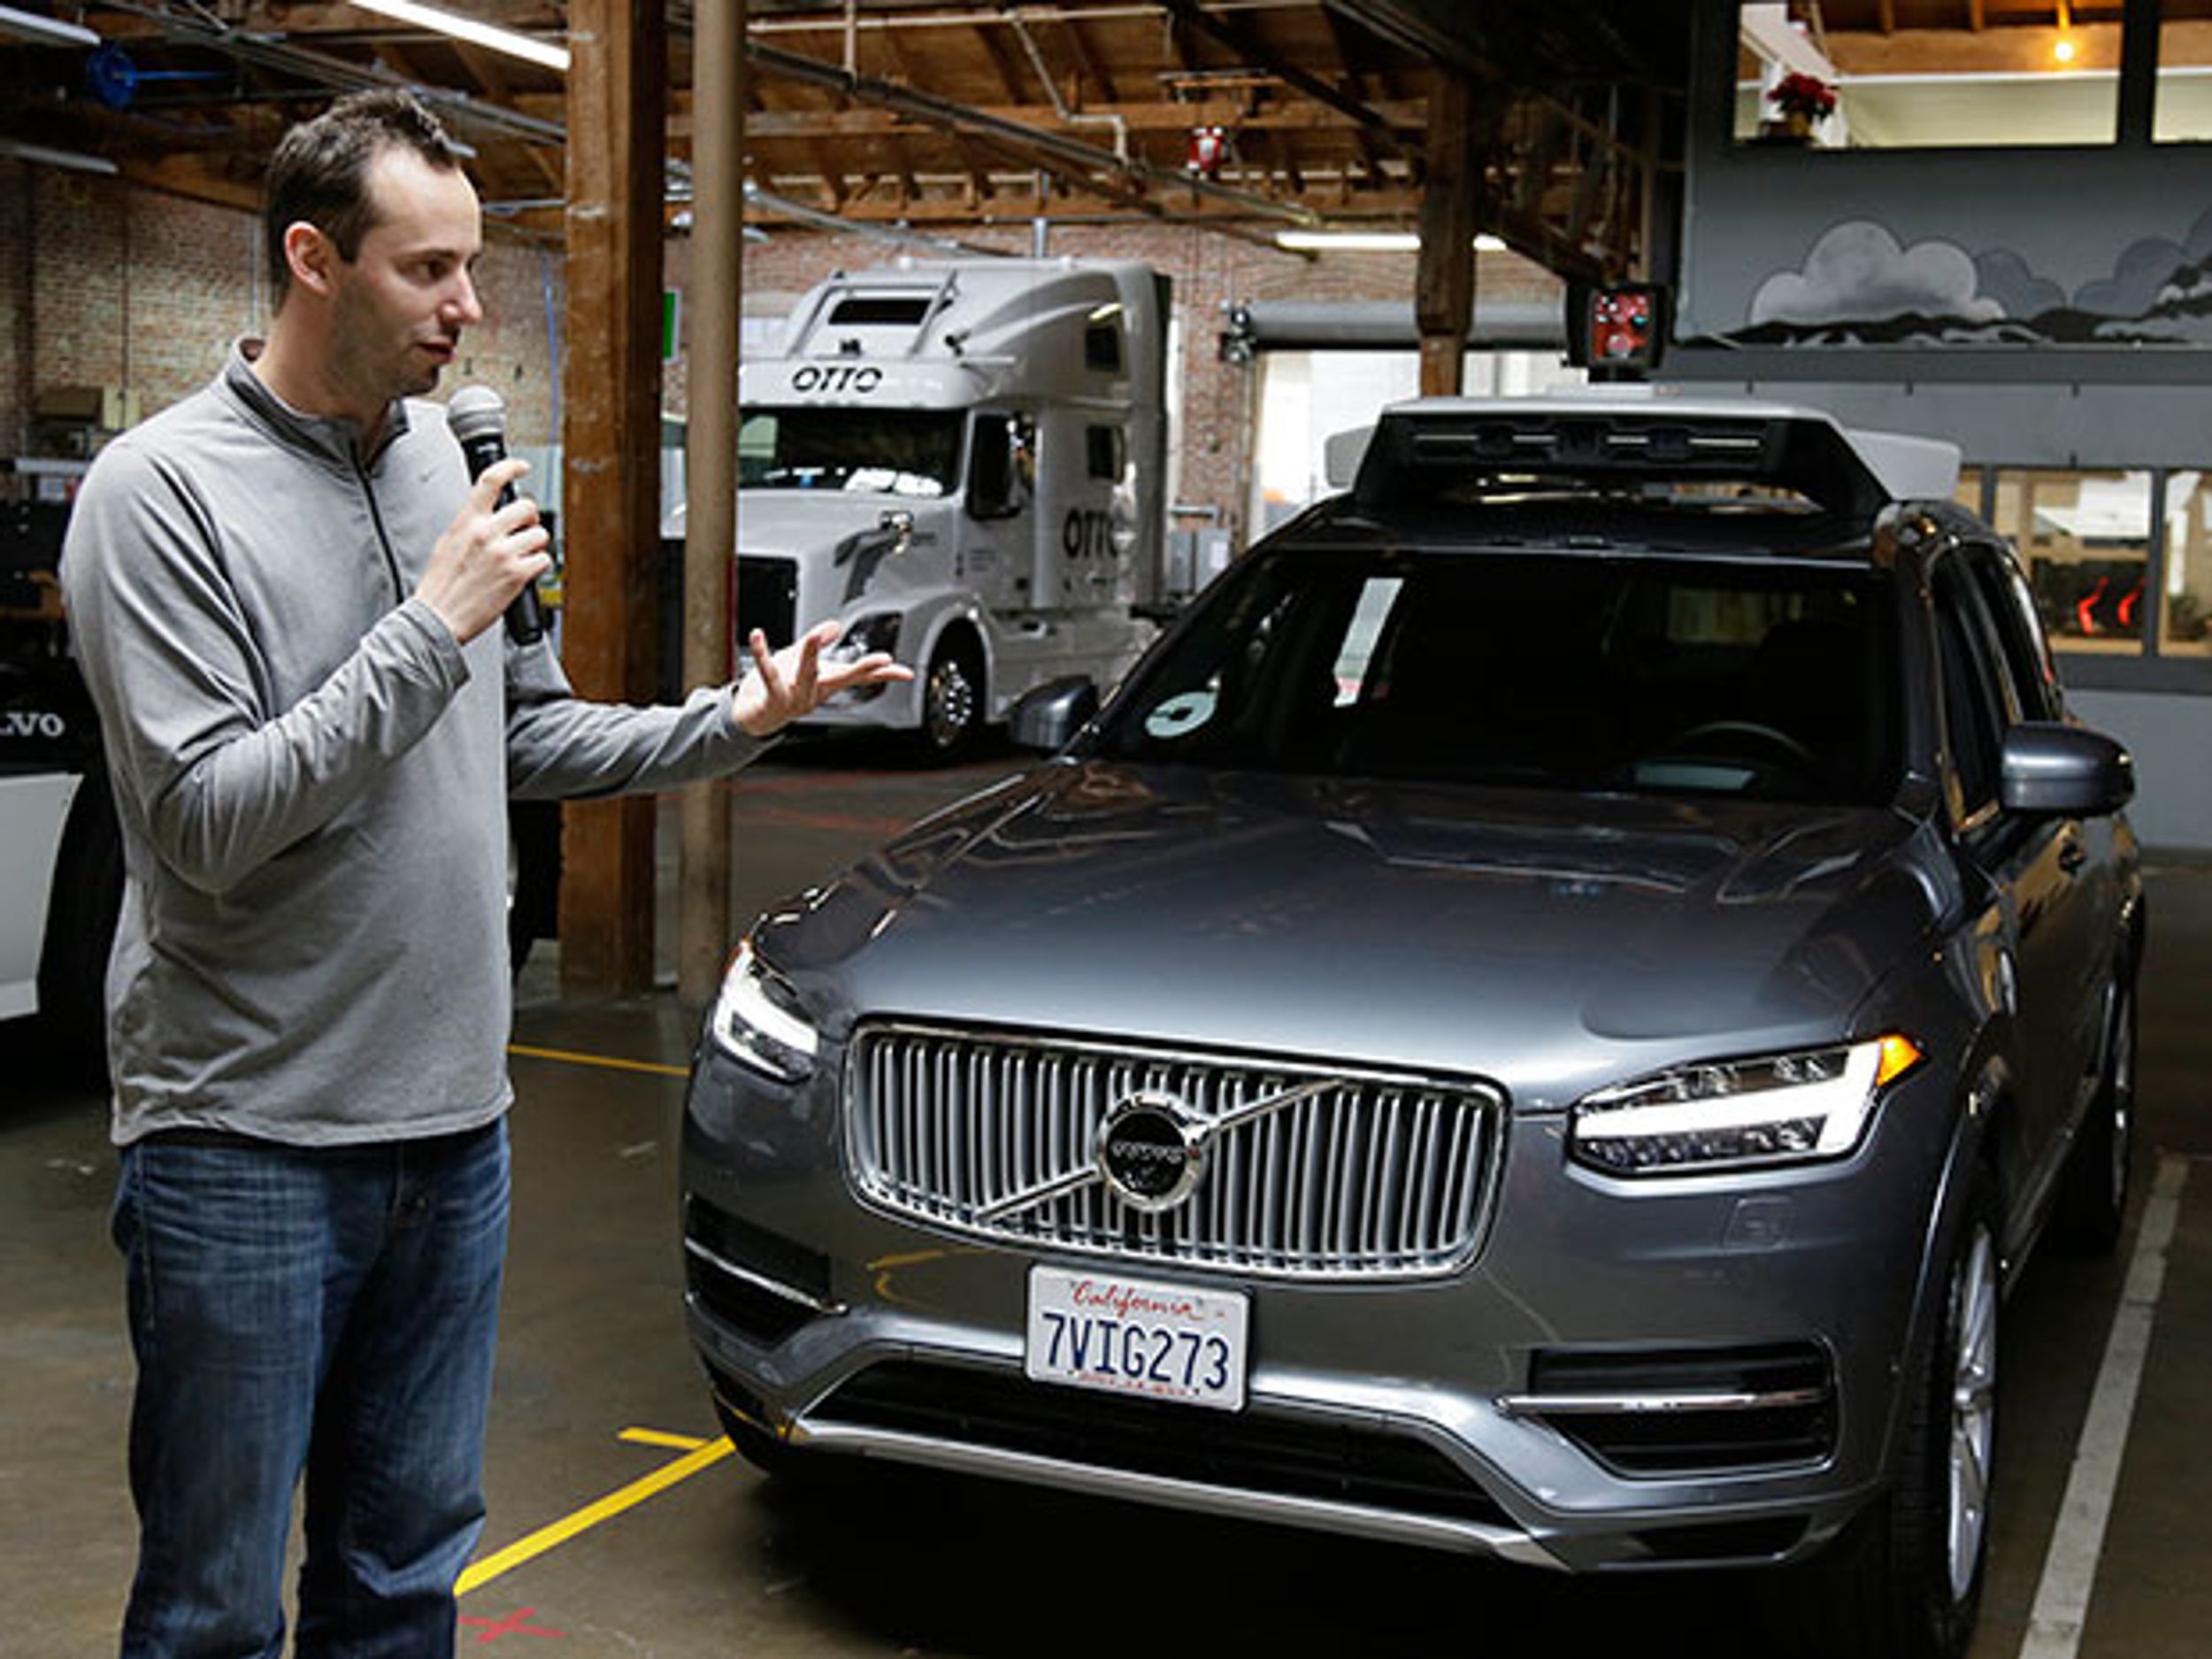 A man, Anthony Levandowski, in a gray shirt holding a microphone speaking in front of a silver sedan.